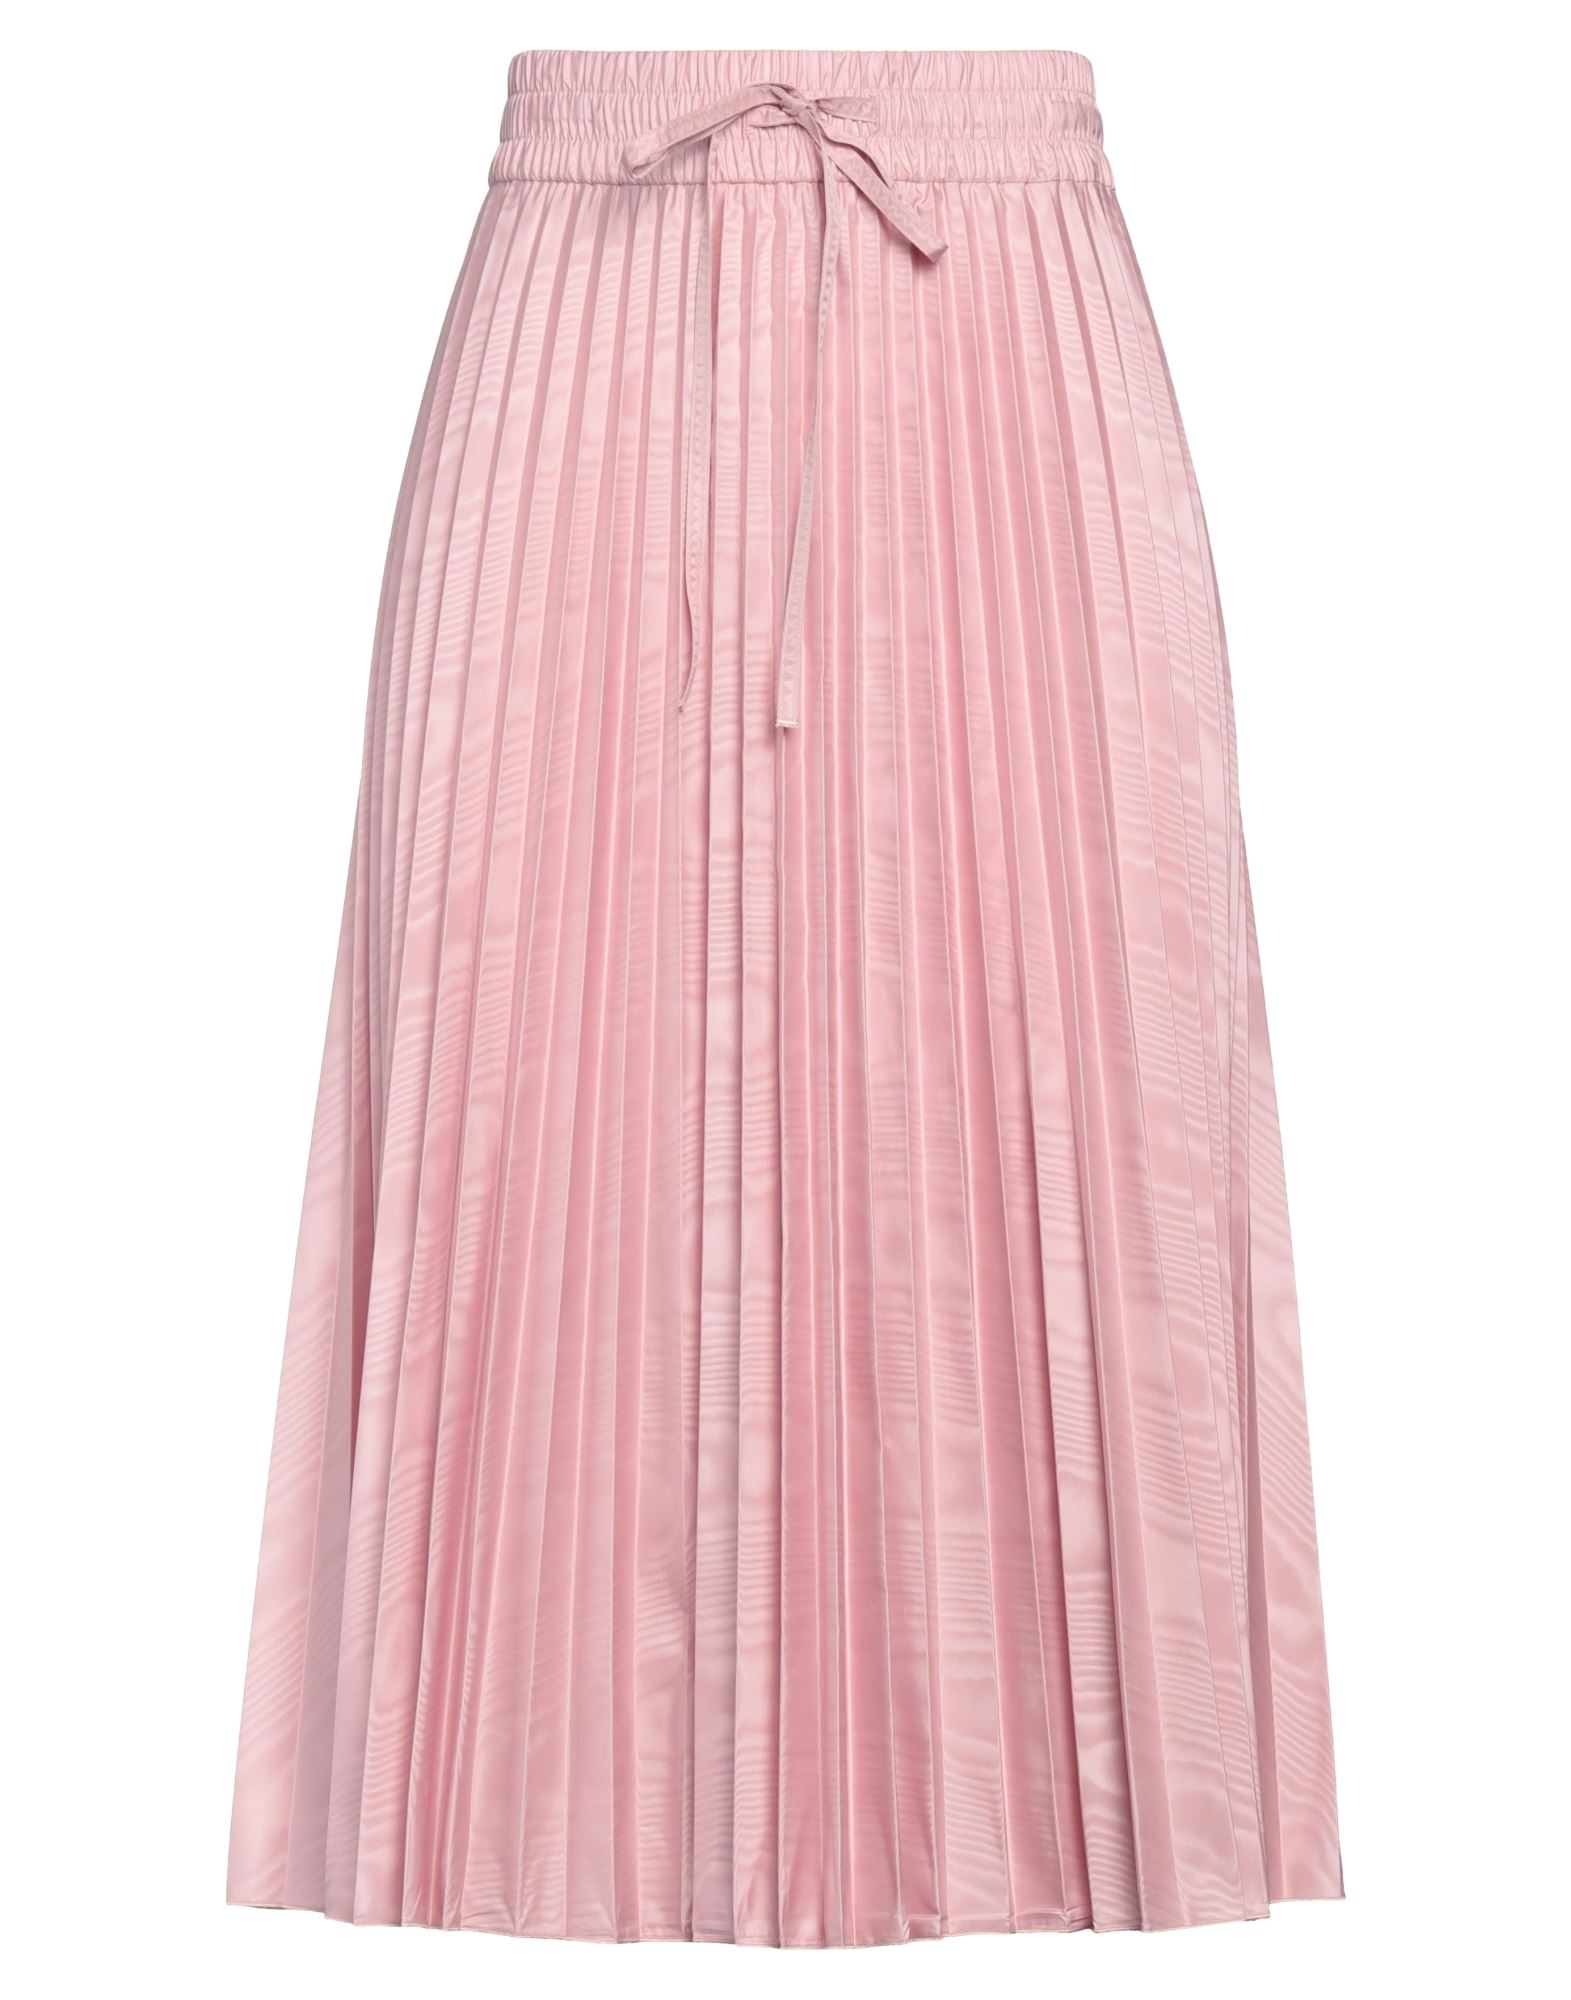 RED VALENTINO RED VALENTINO WOMAN MIDI SKIRT PINK SIZE 6 POLYESTER